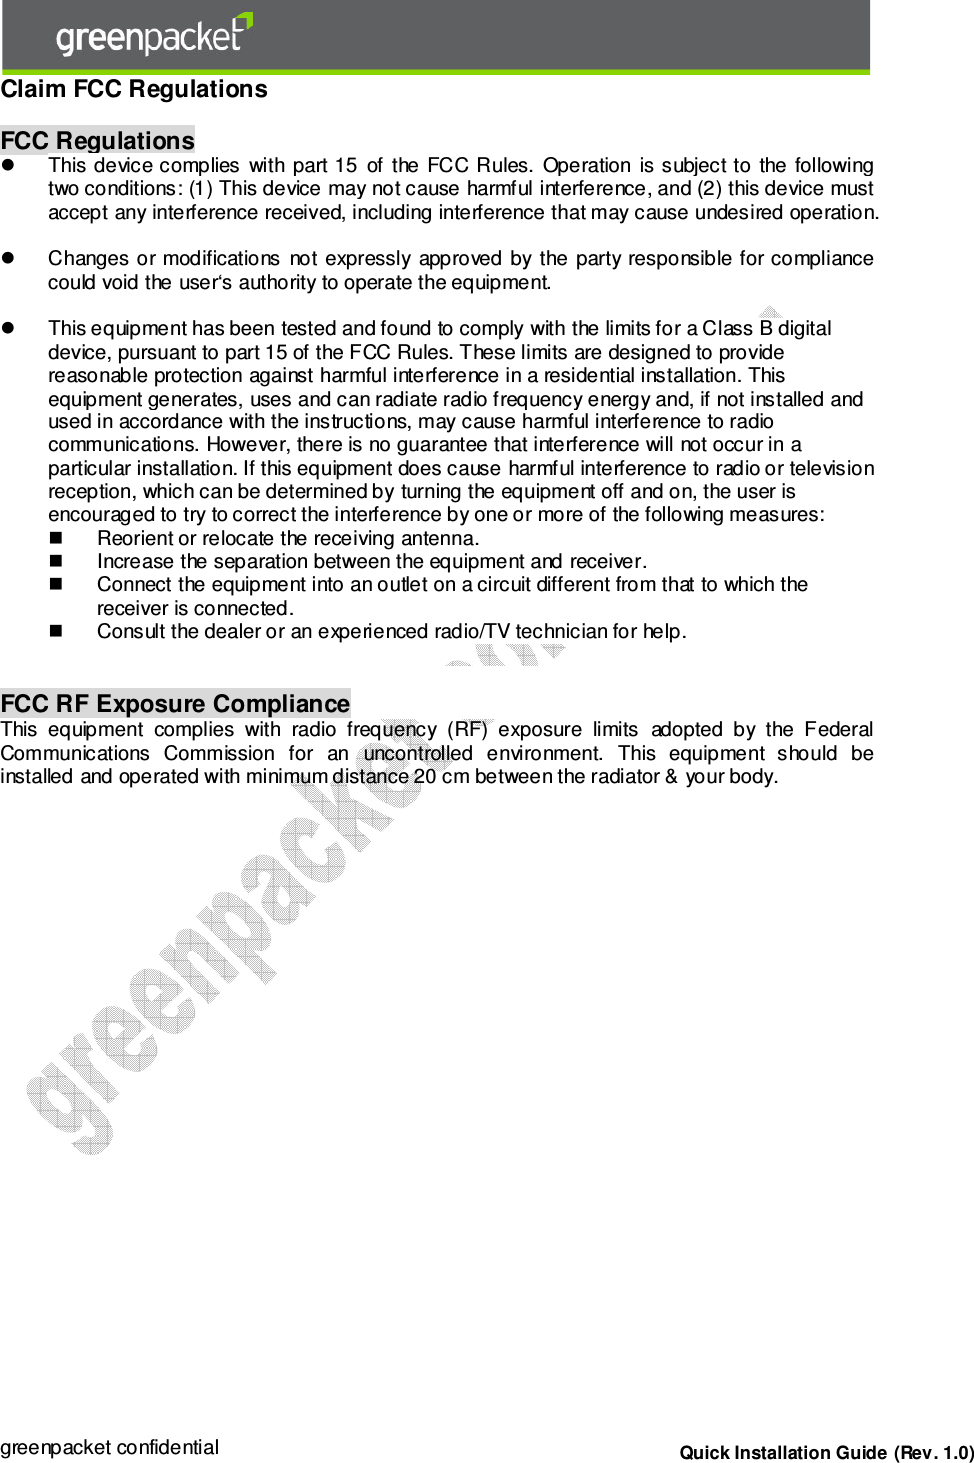 greenpacket confidential  Quick Installation Guide (Rev. 1.0) Claim FCC Regulations FCC Regulations This device complies  with part 15  of  the FCC Rules.  Operation  is subject to  the followingtwo conditions: (1) This device may not cause harmful interference, and (2) this device must accept any interference received, including interference that may cause undesired operation. Changes or  modifications  not  expressly  approved by the  party responsible for compliancecould void the user‘s authority to operate the equipment.This equipment has been tested and found to comply with the limits for a Class B digitaldevice, pursuant to part 15 of the FCC Rules. These limits are designed to providereasonable protection against harmful interference in a residential installation. Thisequipment generates, uses and can radiate radio frequency energy and, if not installed andused in accordance with the instructions, may cause harmful interference to radiocommunications. However, there is no guarantee that interference will not occur in a particular installation. If this equipment does cause harmful interference to radio or televisionreception, which can be determined by turning the equipment off and on, the user isencouraged to try to correct the interference by one or more of the following measures:Reorient or relocate the receiving antenna. Increase the separation between the equipment and receiver. Connect the equipment into an outlet on a circuit different from that to which the receiver is connected. Consult the dealer or an experienced radio/TV technician for help. FCC RF Exposure Compliance This  equipment  complies  with  radio  frequency  (RF)  exposure  limits  adopted  by  the  Federal Communications  Commission  for  an  uncontrolled  environment.  This  equipment  should  be installed and operated with minimum distance 20 cm between the radiator &amp; your body. 